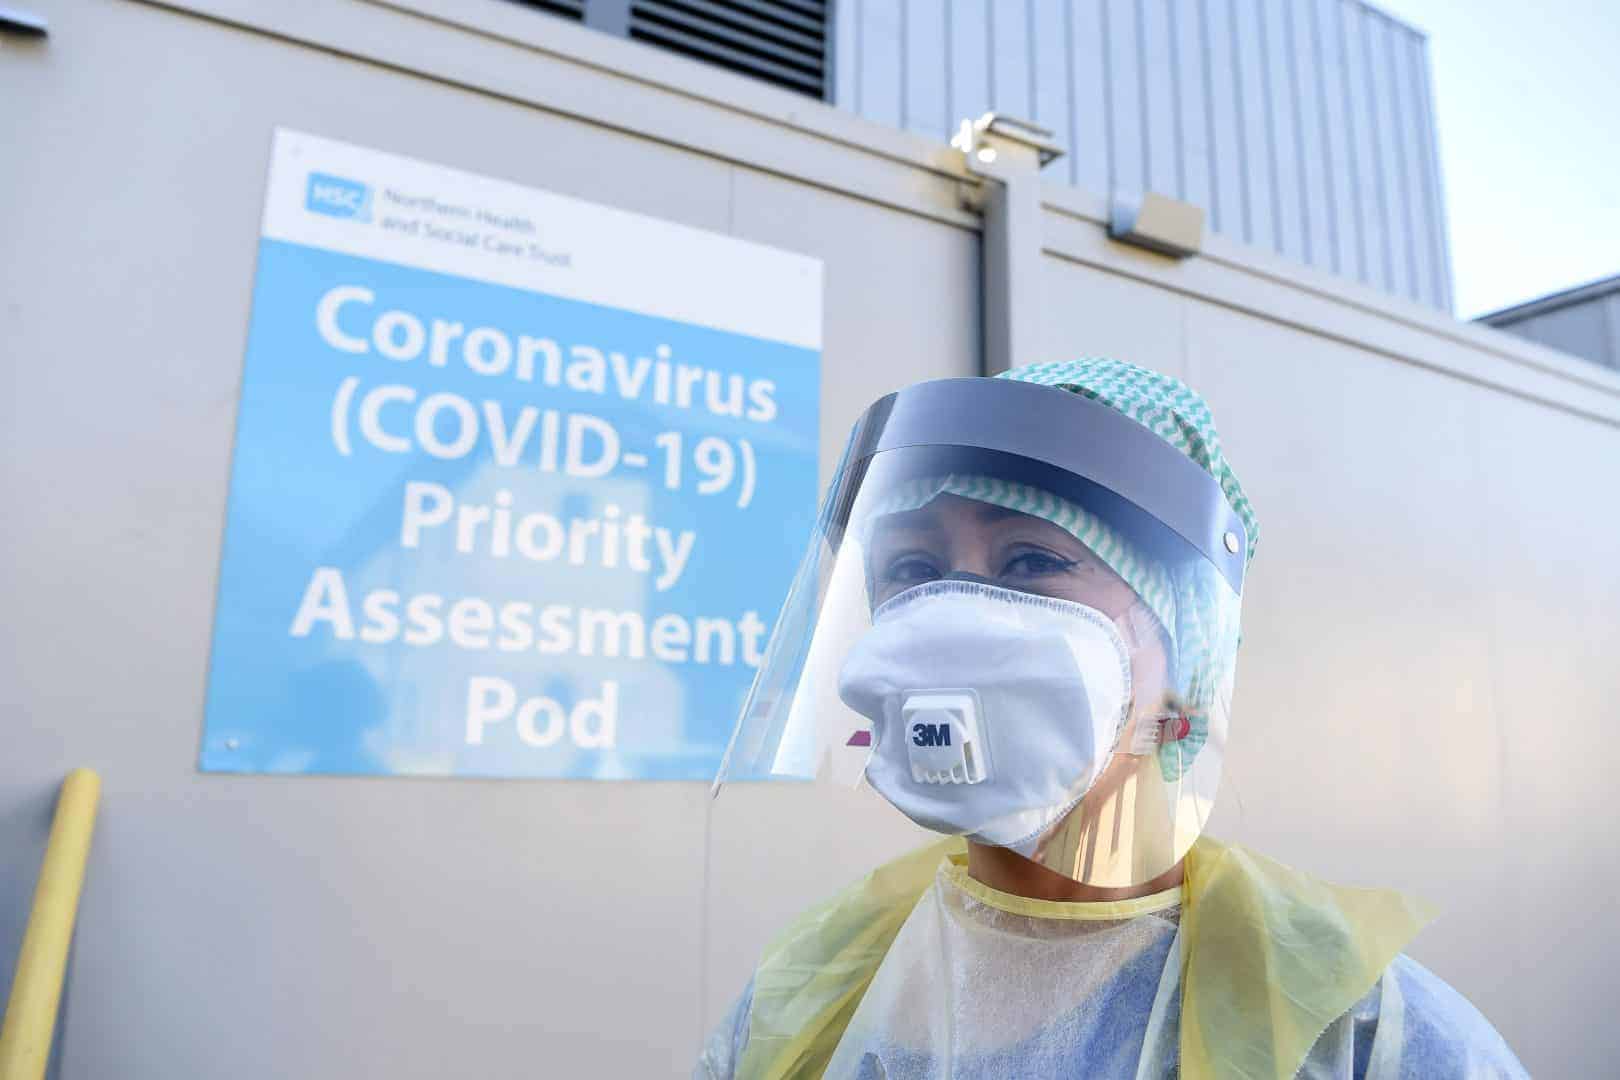 New fact checking service launched to combat coronavirus disinformation